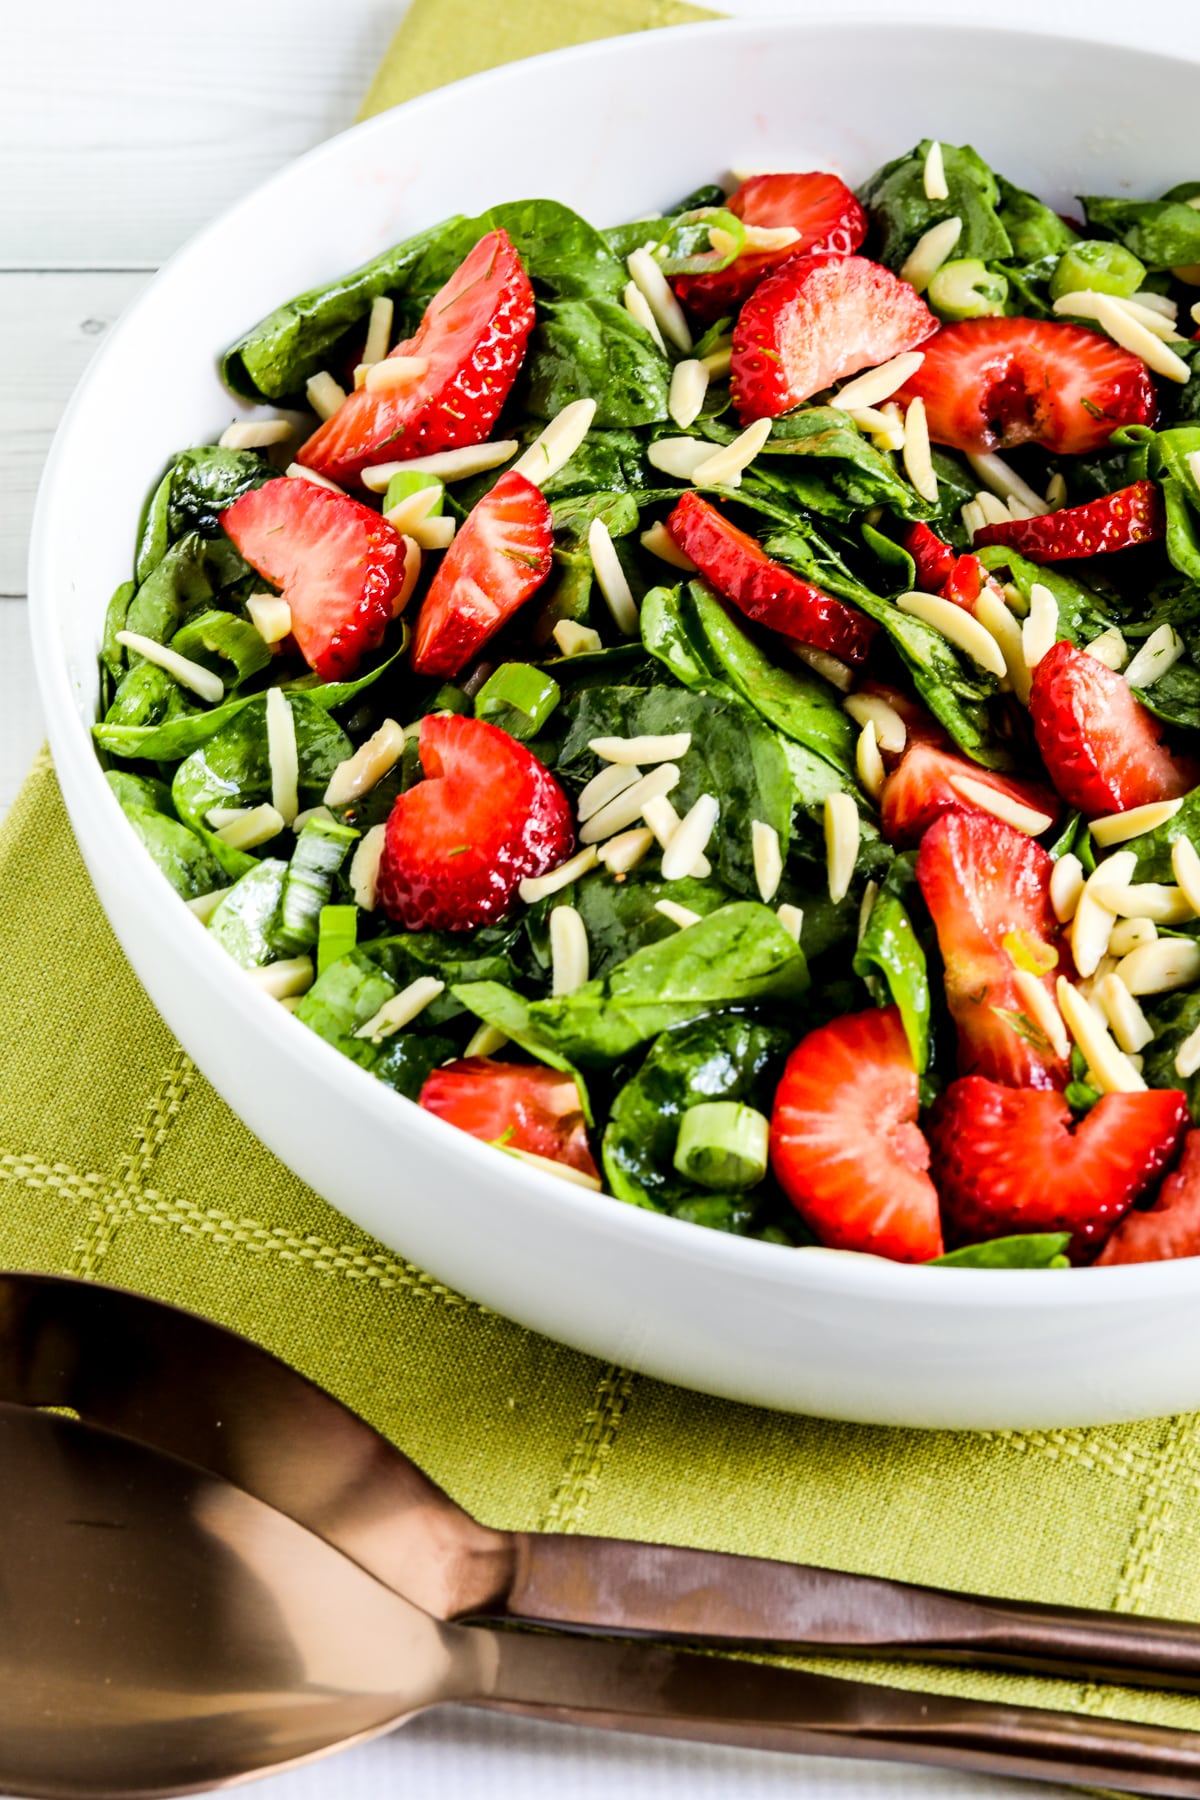 Strawberry Spinach Salad shown in serving bowl.